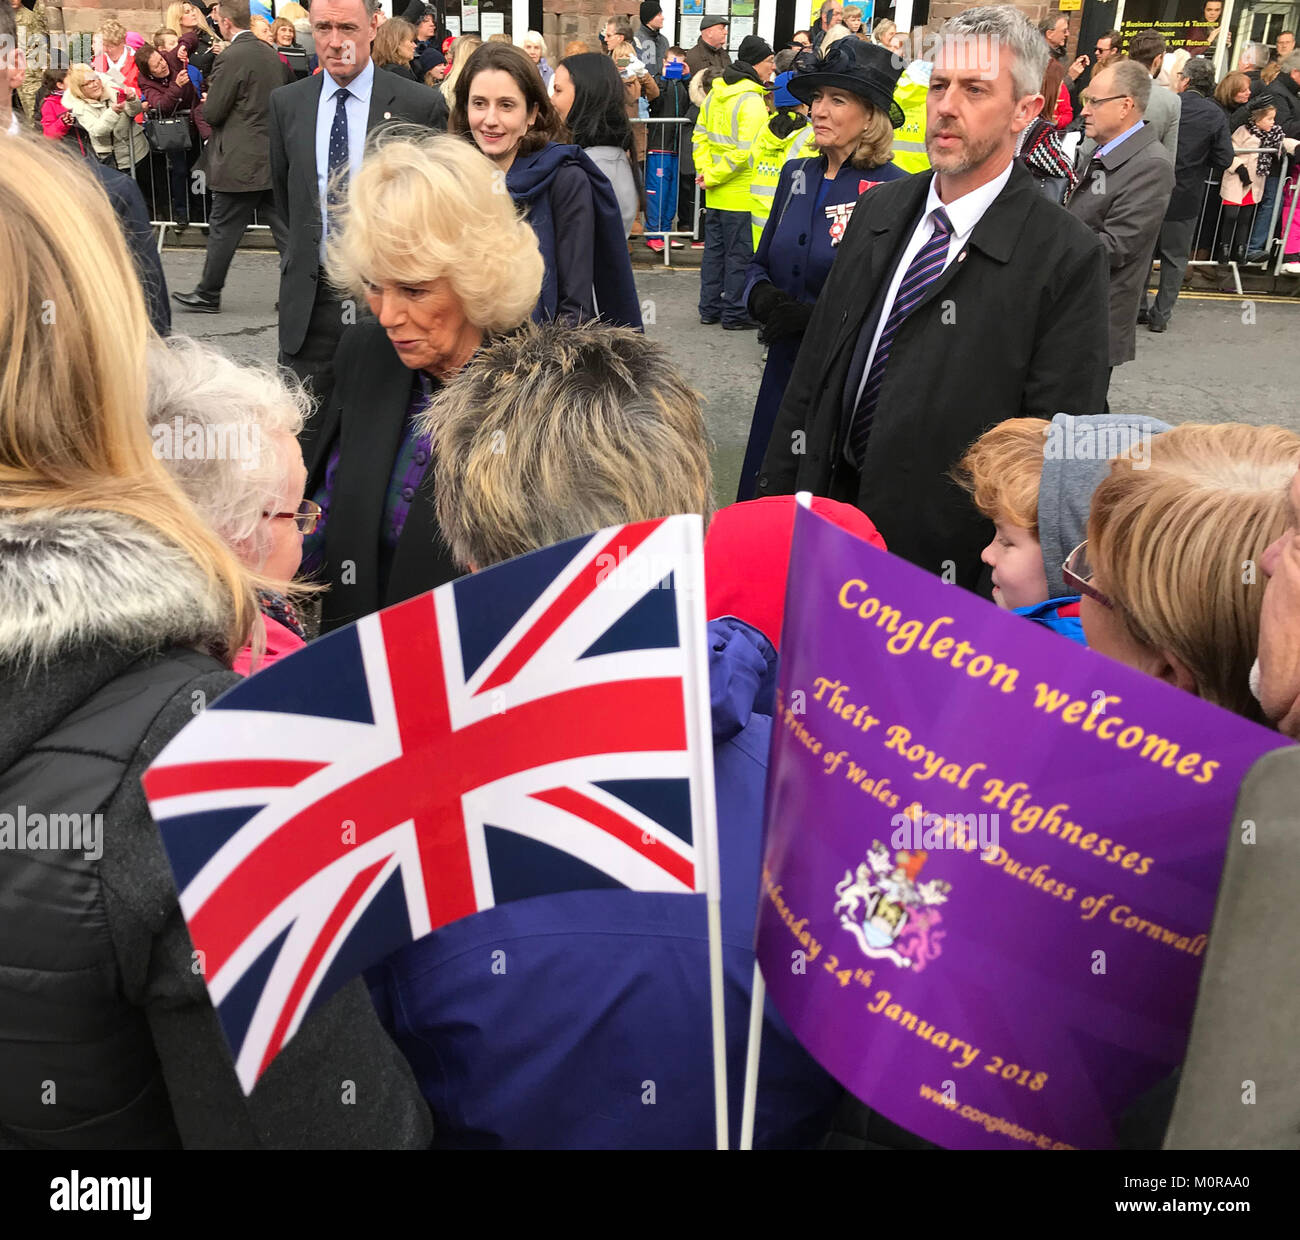 Congleton, Cheshire, England, UK. 25th January 2018. Camilla, Duchess of Cornwall greets well-wishers in Congleton Town Centre (Cheshire UK), as crowds wave commemorative flags bearing an upside-down Union Jack - a symbol of distress.  The Royal couple were visiting the Cheshire market town to visit community projects, celebrate 700 years having a Mayor and unveil sculptor Amy Goodman's statue commemorating Treo, an explosives sniffer dog, who served in Afghanistan.  After crossing the road to visit the Prince of Wales pub, couple chatted and shook hands with visitors. Stock Photo